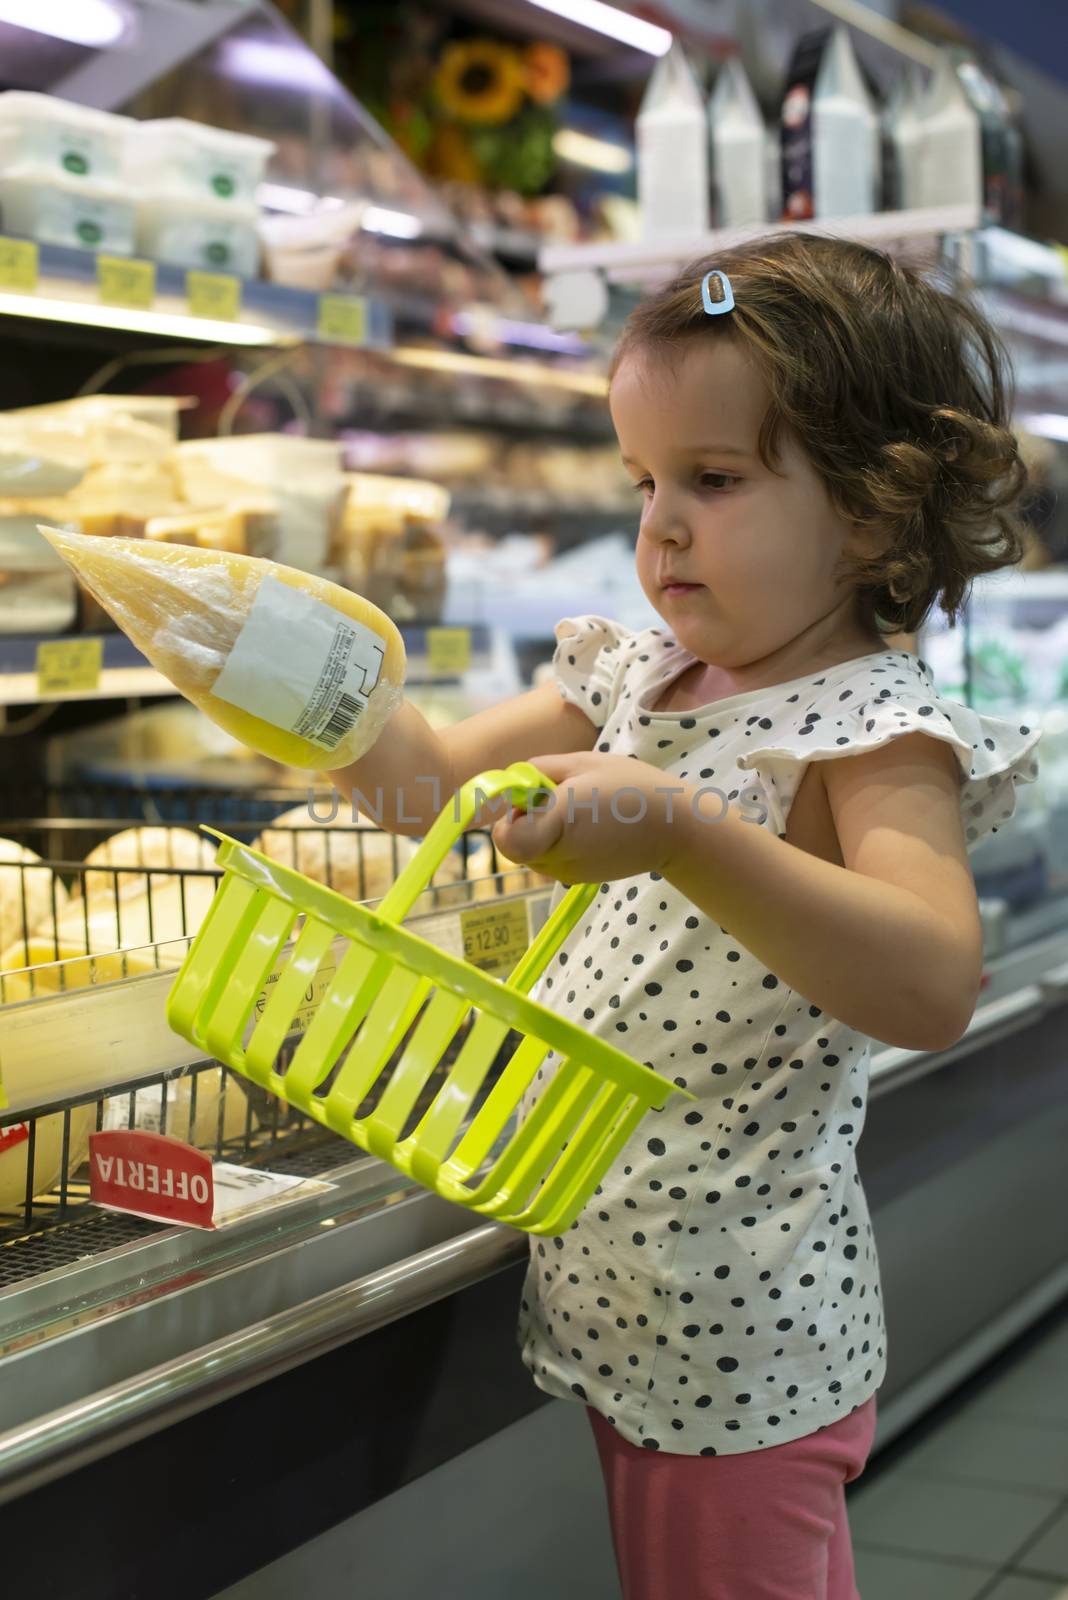 Little girl buying cheese in supermarket. Child hold small basket in supermarket and select cheese from store showcase. Concept for children selecting products in shop.